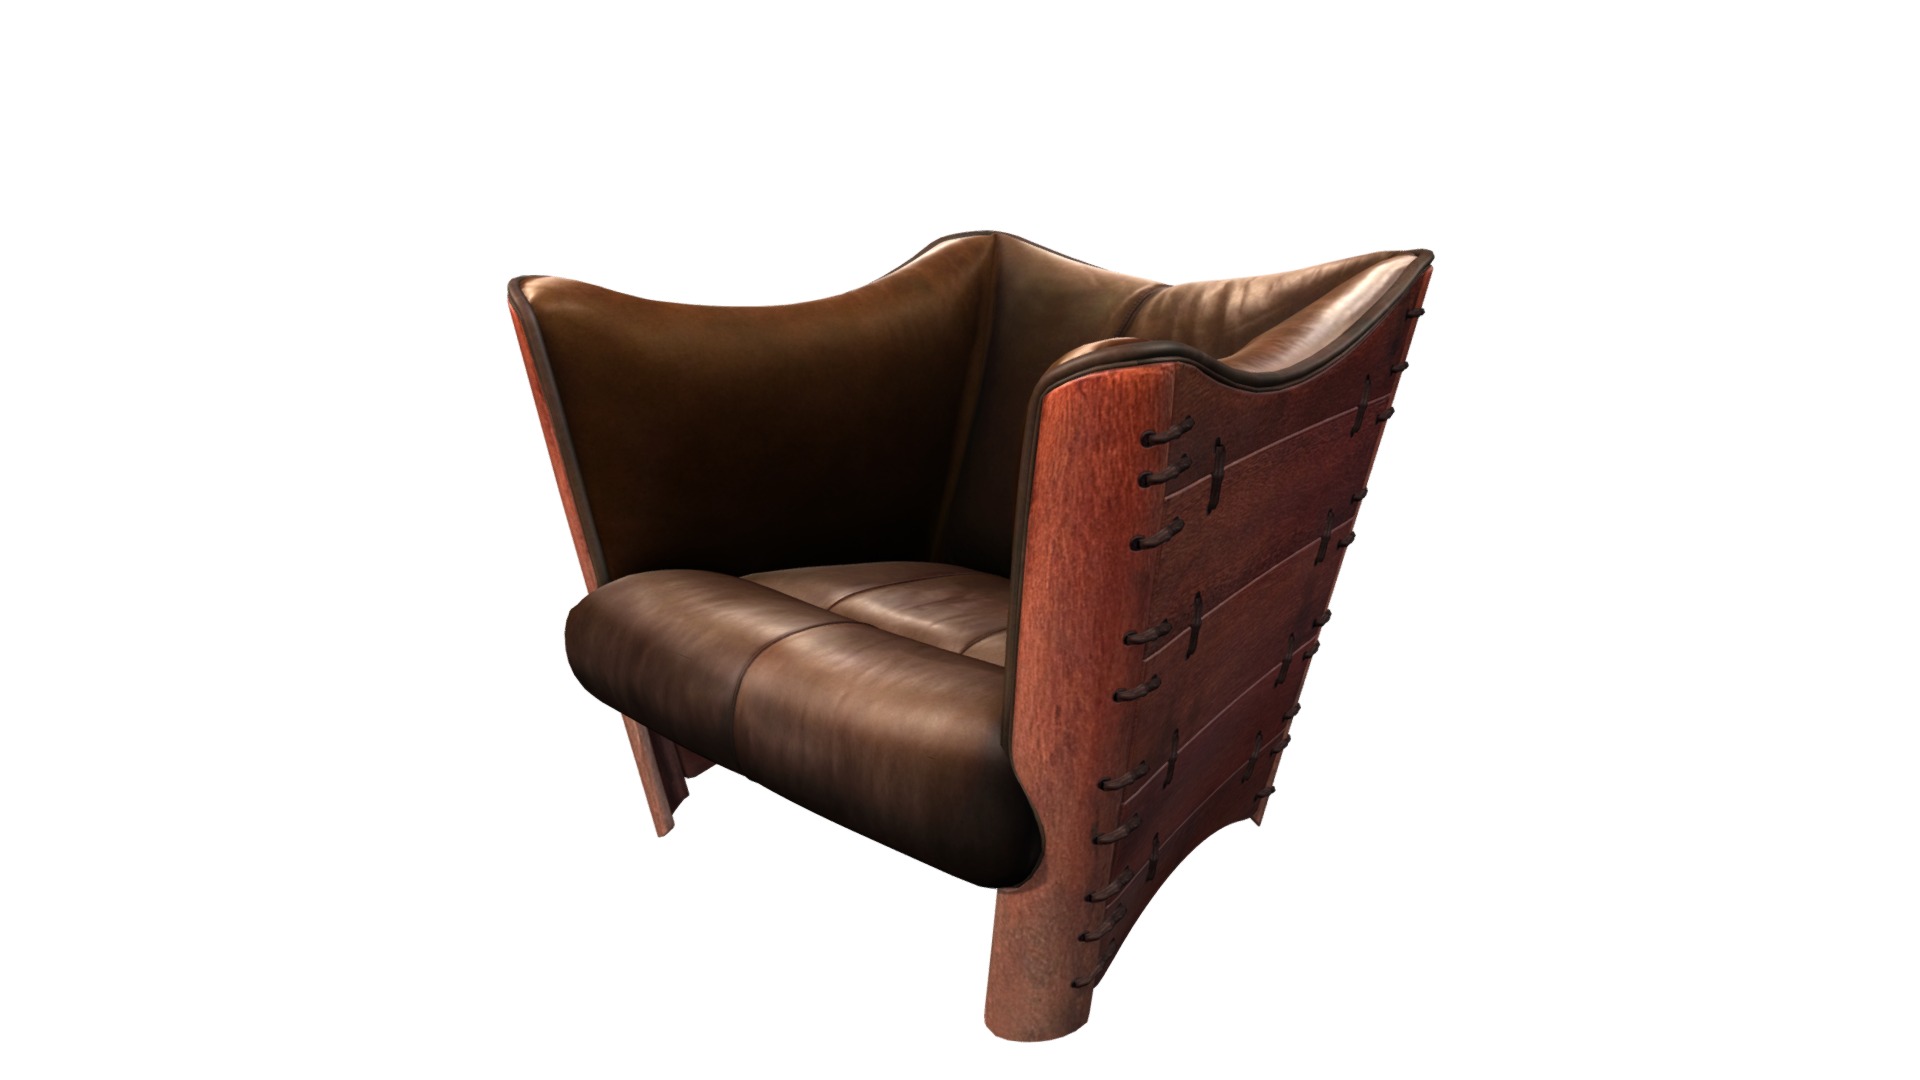 3D model Cayenne Armchair - This is a 3D model of the Cayenne Armchair. The 3D model is about a brown leather chair.